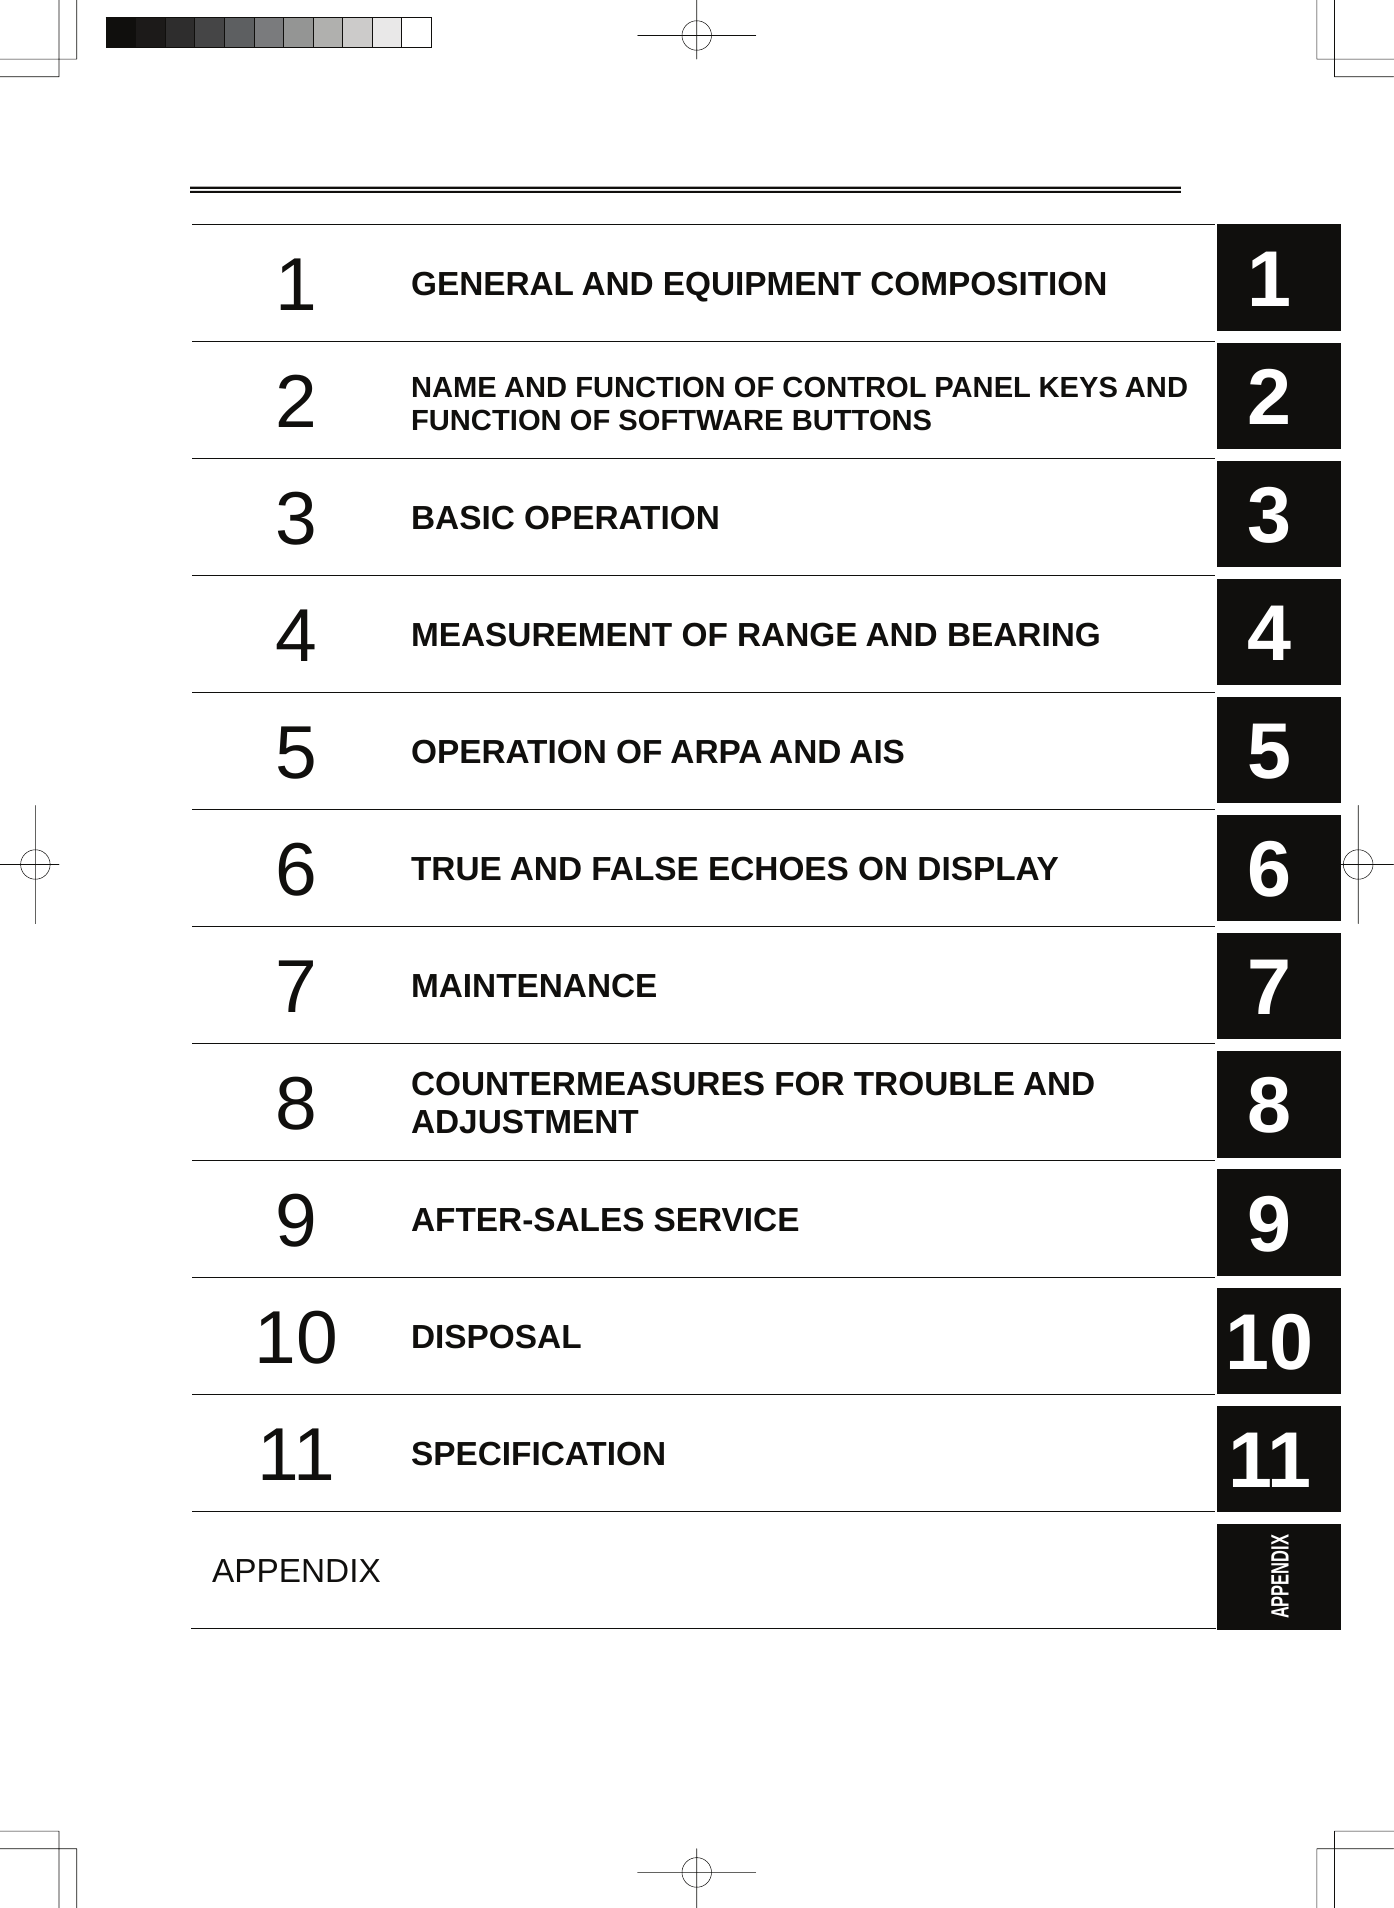  1  GENERAL AND EQUIPMENT COMPOSITION 2  NAME AND FUNCTION OF CONTROL PANEL KEYS AND FUNCTION OF SOFTWARE BUTTONS 3  BASIC OPERATION 4  MEASUREMENT OF RANGE AND BEARING   5  OPERATION OF ARPA AND AIS 6  TRUE AND FALSE ECHOES ON DISPLAY   7  MAINTENANCE  8  COUNTERMEASURES FOR TROUBLE AND ADJUSTMENT 9  AFTER-SALES SERVICE 10  DISPOSAL 11  SPECIFICATION APPENDIX   1 2 3 4 5 6 7 8 9 10 11  APPENDIX    